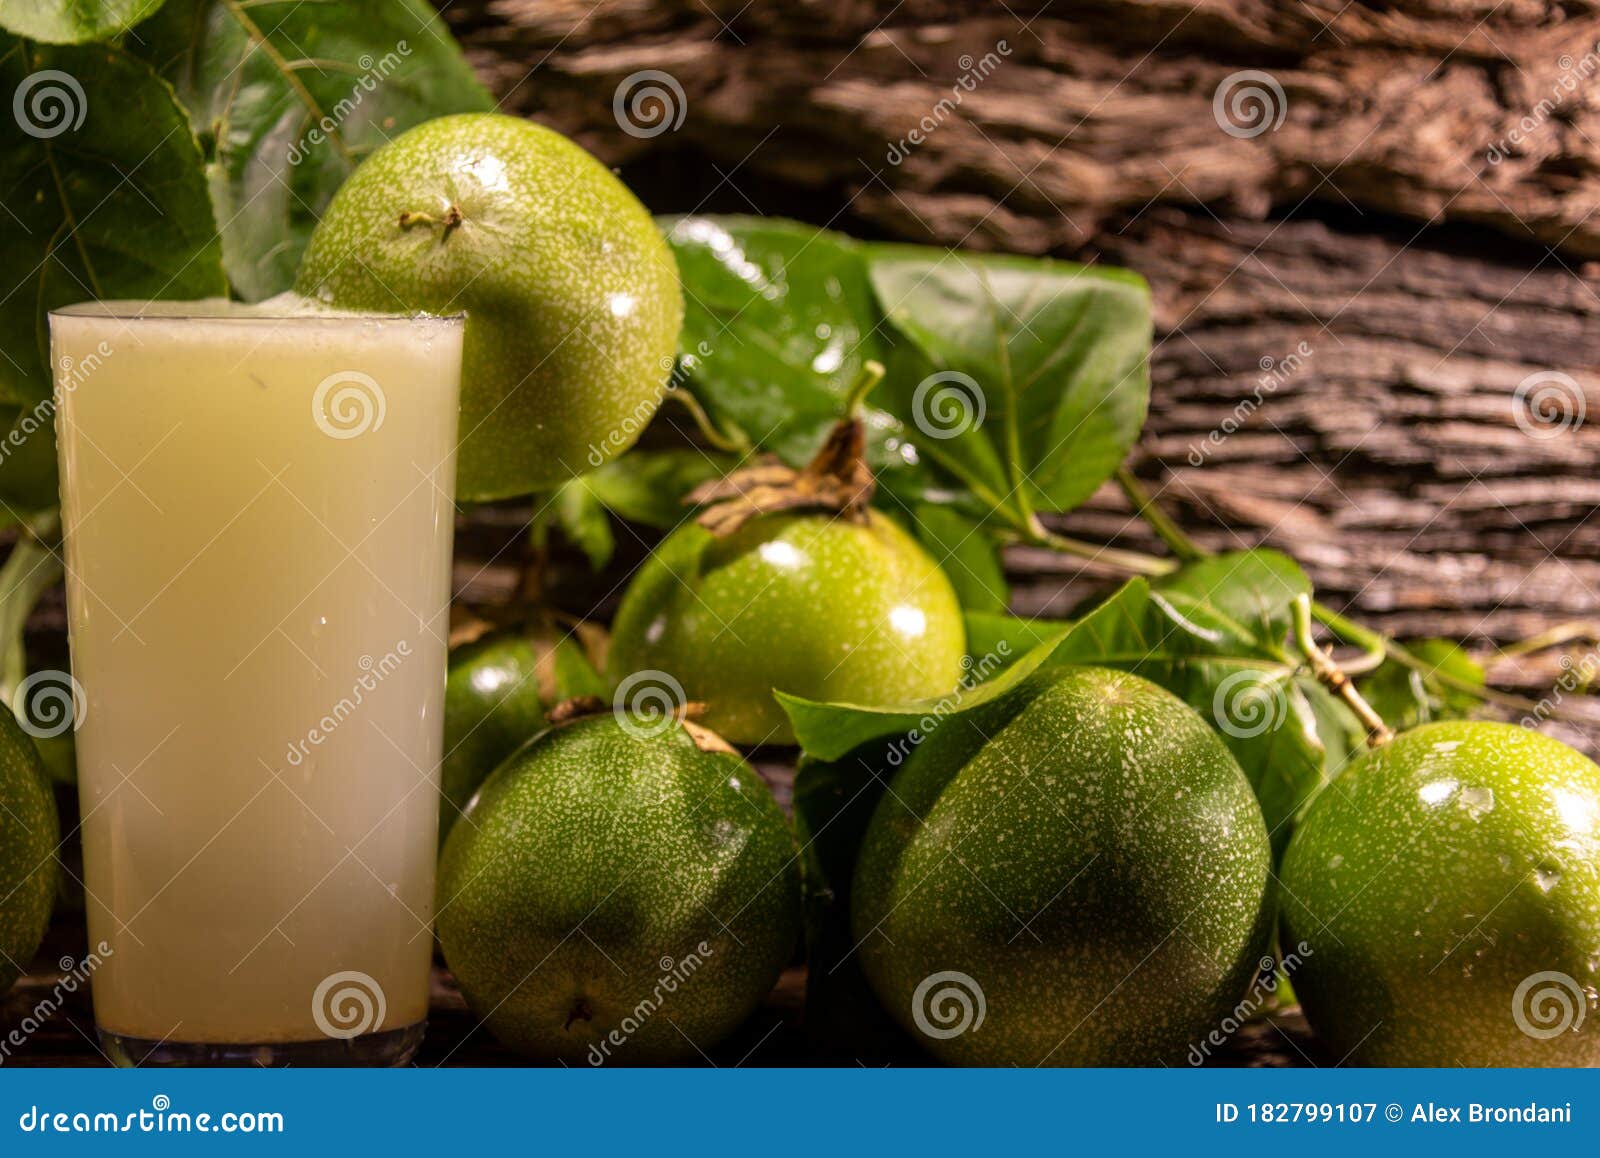 fresh fruits and glass of passion fruit passiflora edulis juice amid green leaves and wooden background